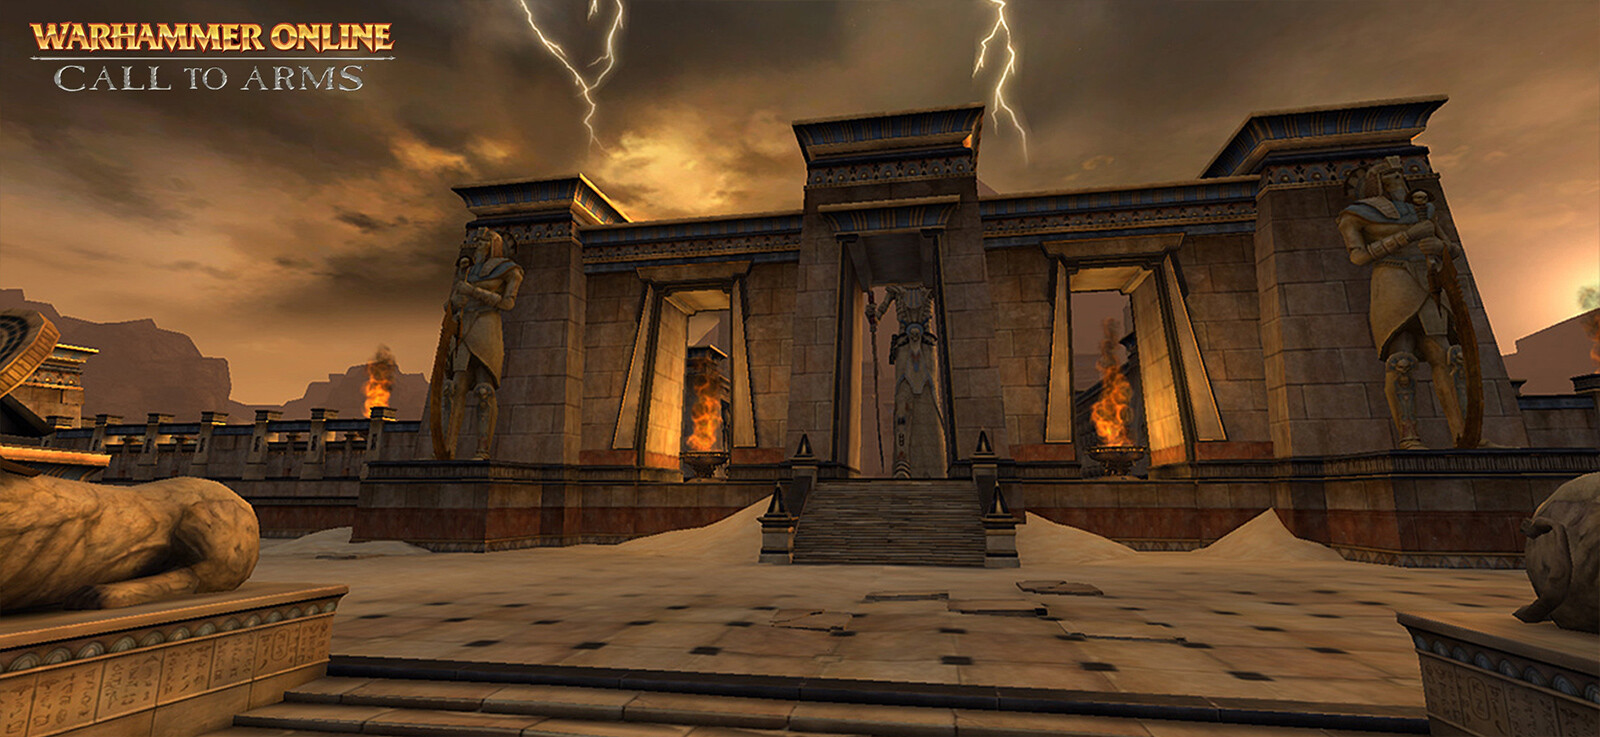 Main Causeway Area - Statues and Main Pyramid created by fellow artist. Responsible for a majority of the remaining assets in scene as well as layout and design of area.